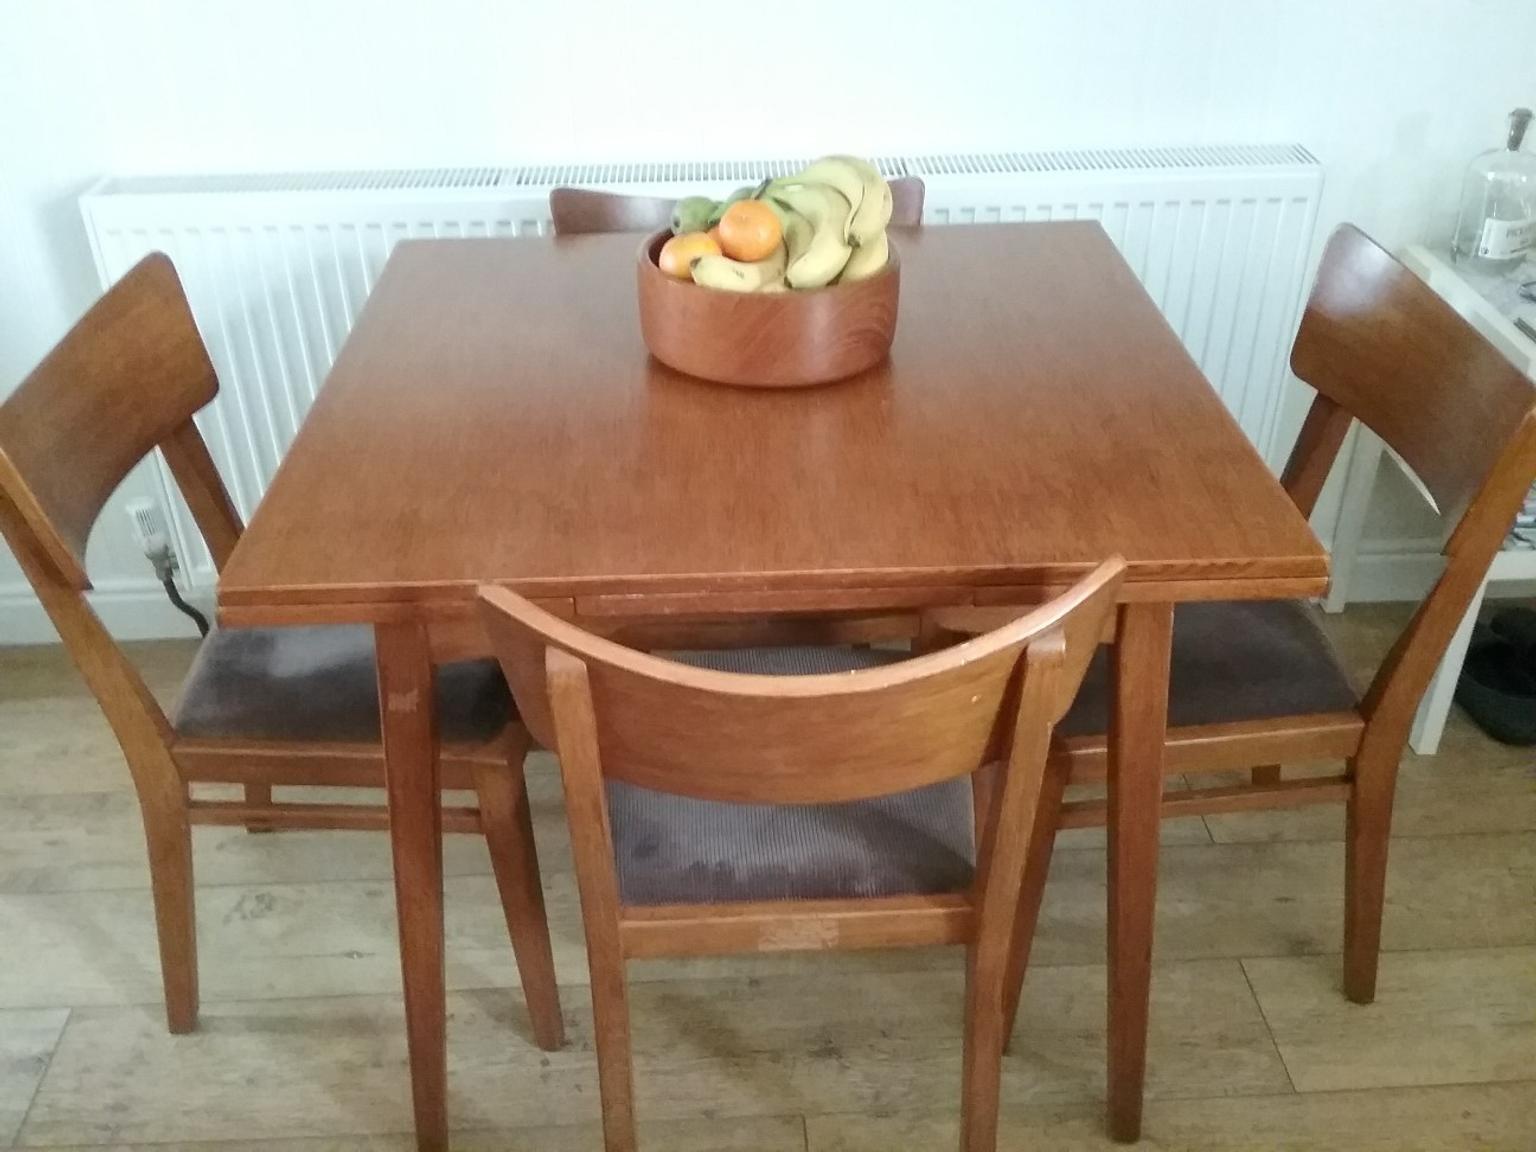 Vintage G Plan Table Chairs In Bb11 Burnley For 45 00 For Sale Shpock